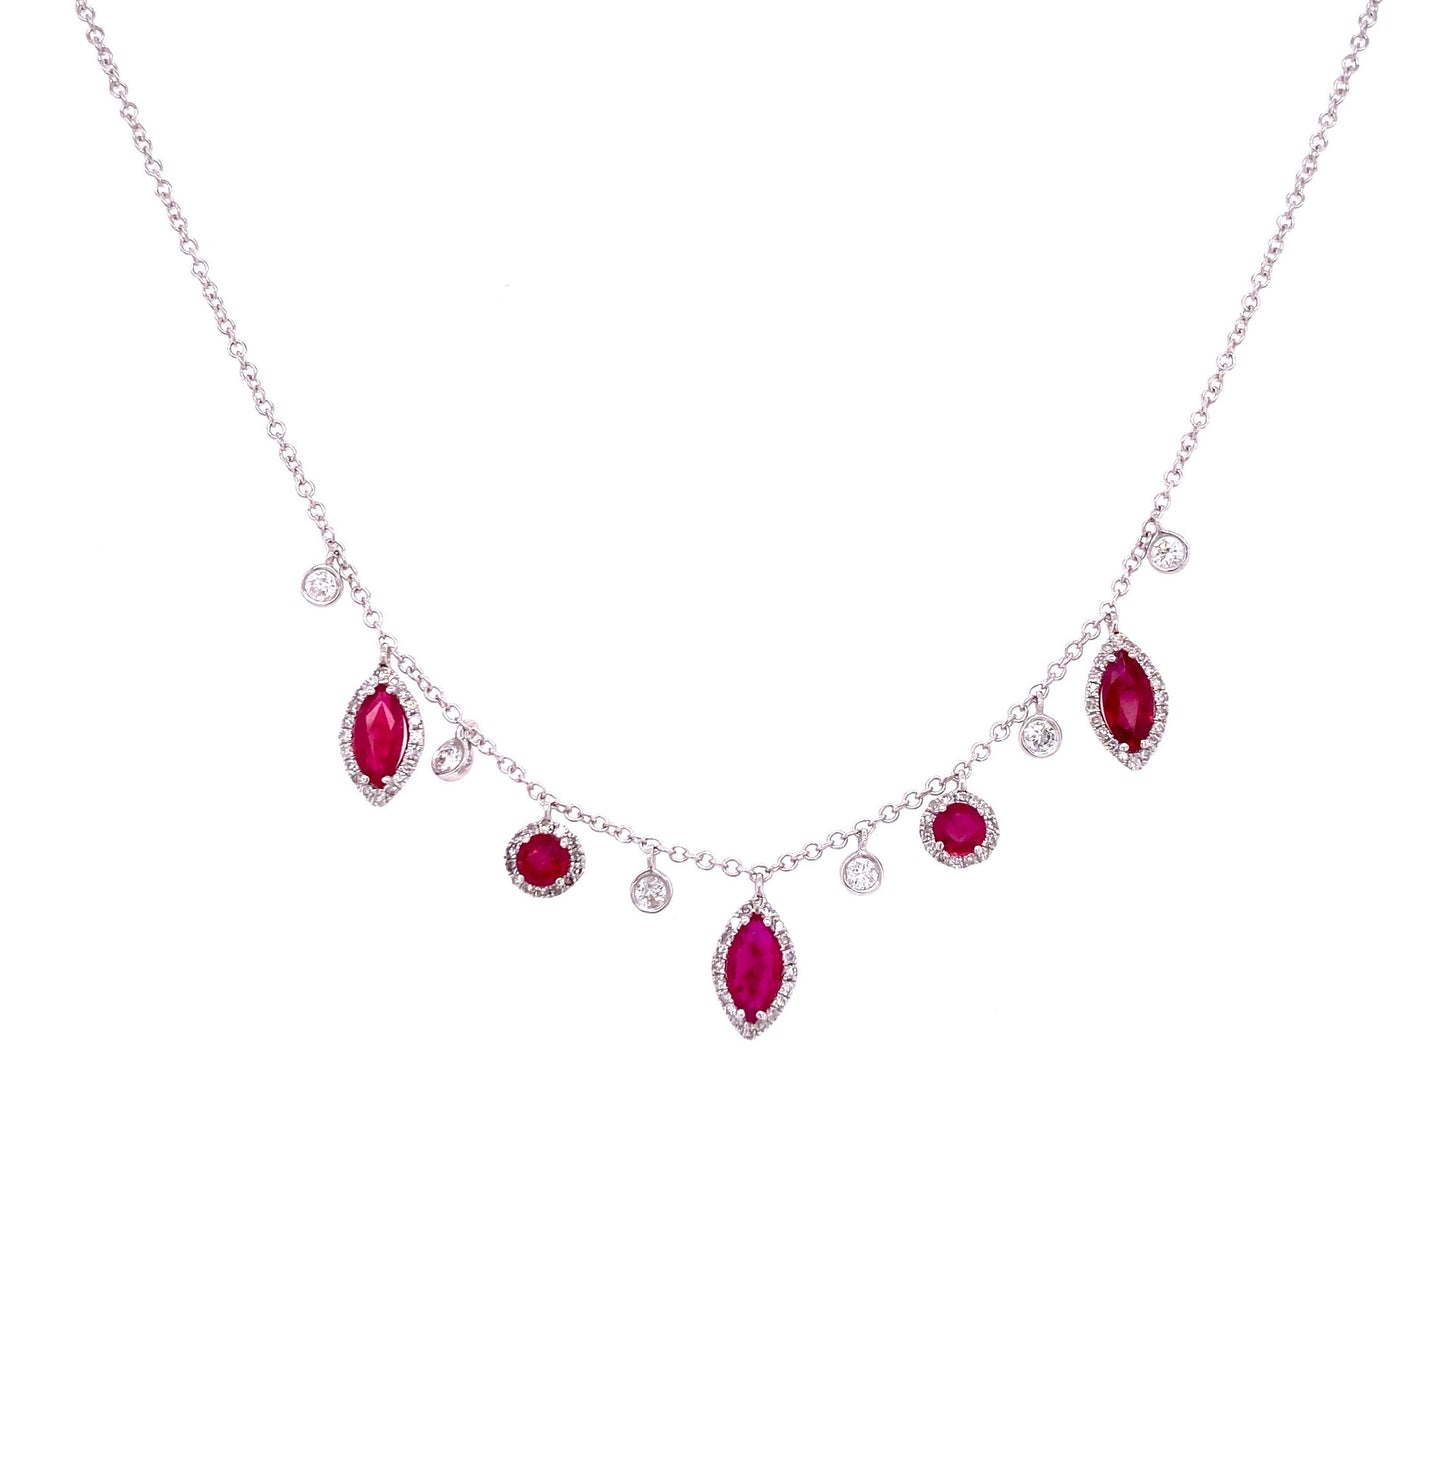 Meira T 14kt White Gold Ruby and Diamond Charm Necklace